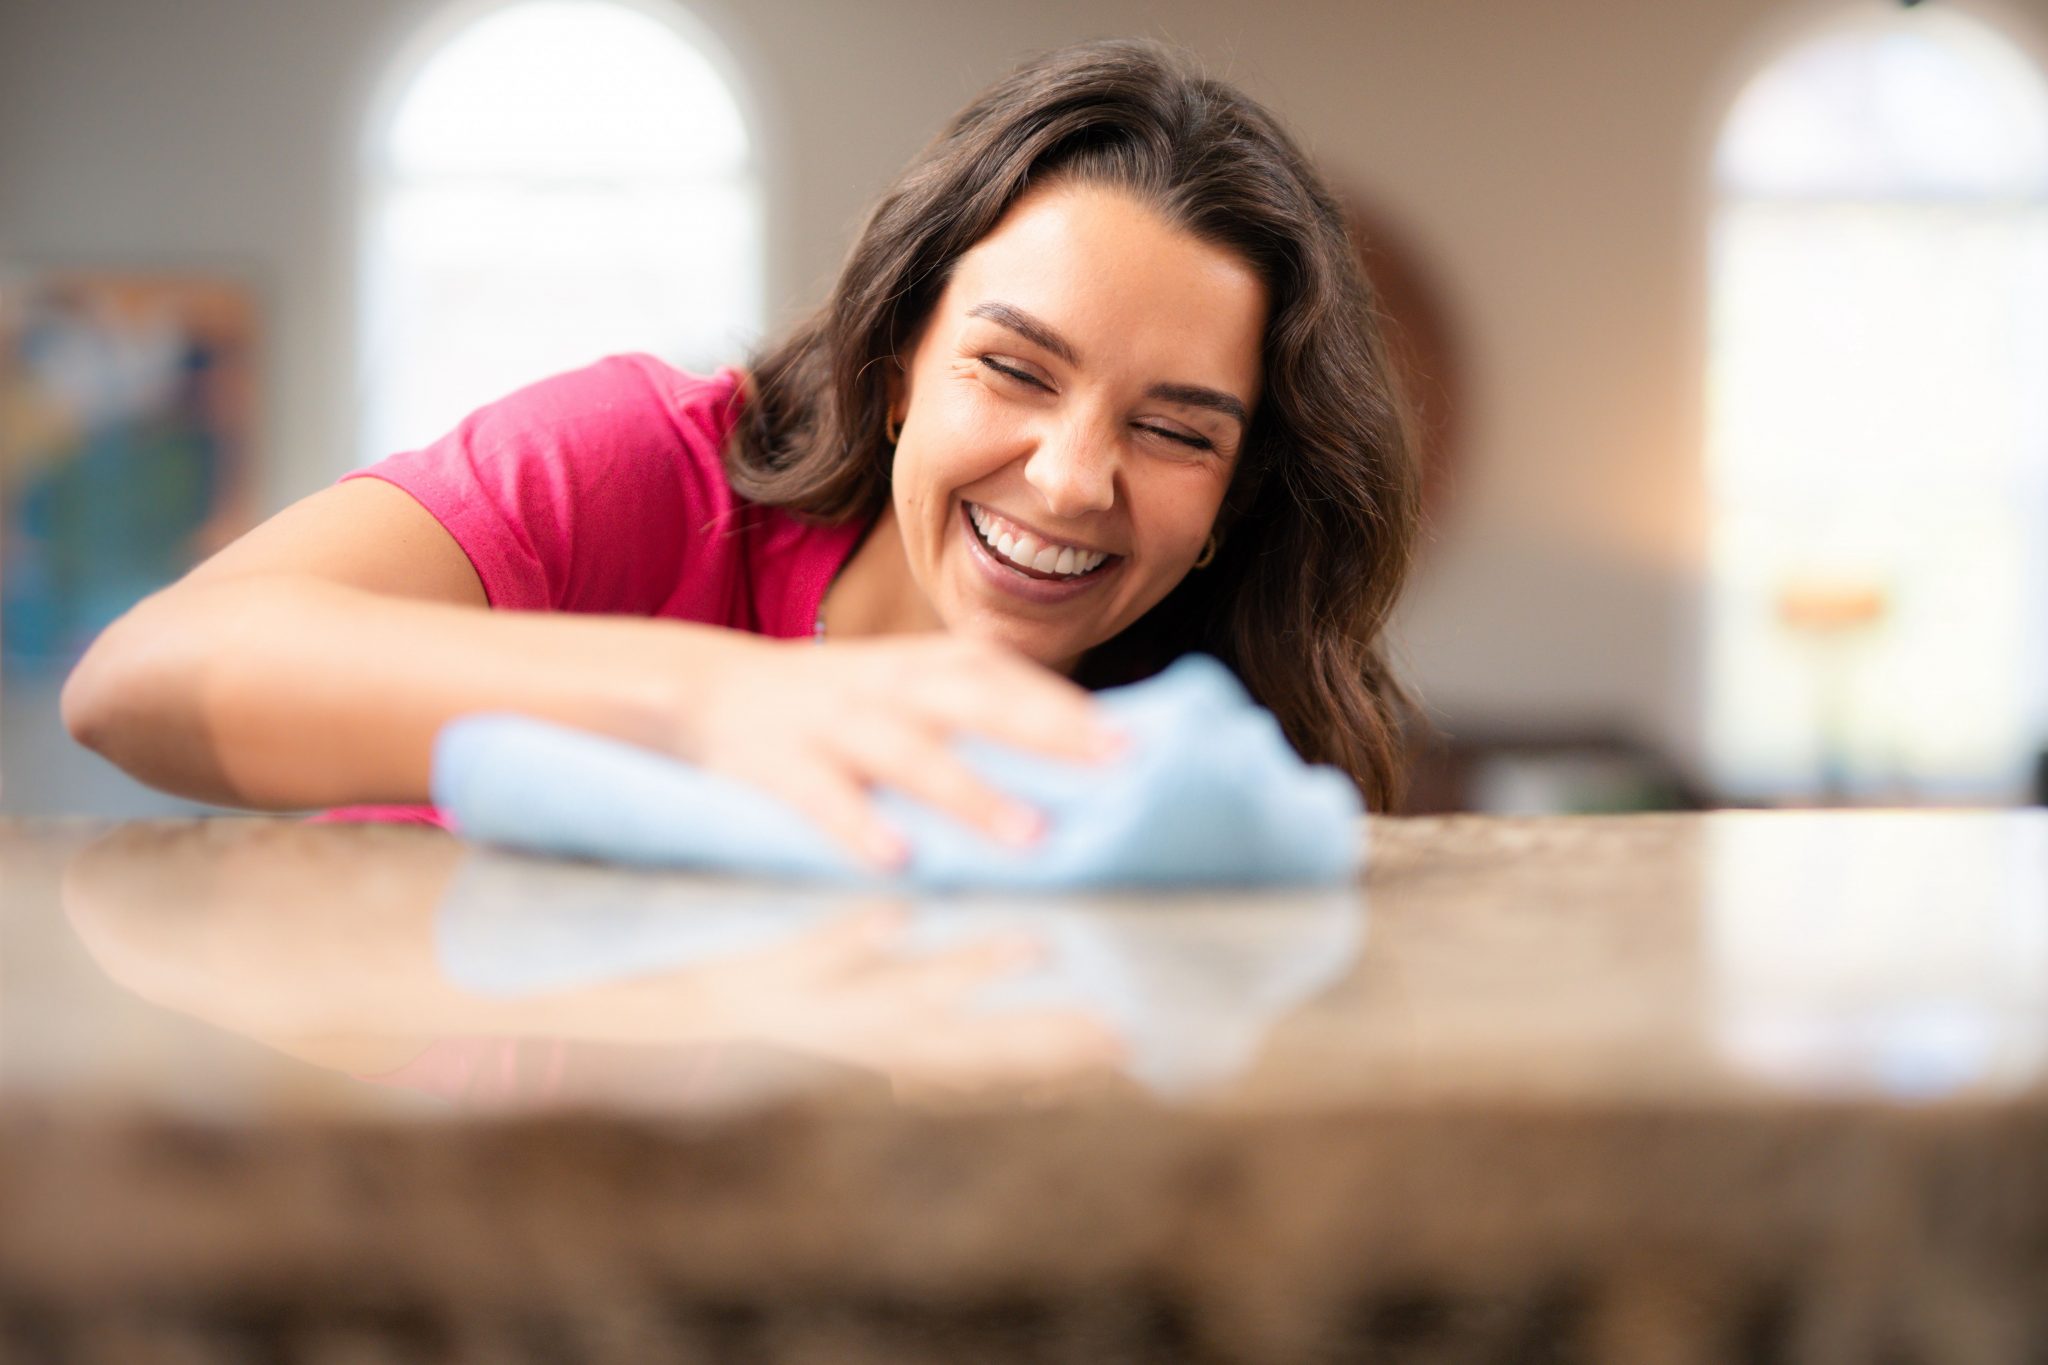 better life maids, house cleaning in clayton, house cleaning near me, house cleaning near clayton, best maids in clayton, best maid service near me, top quality maids, residential cleaner, move out maids clayton